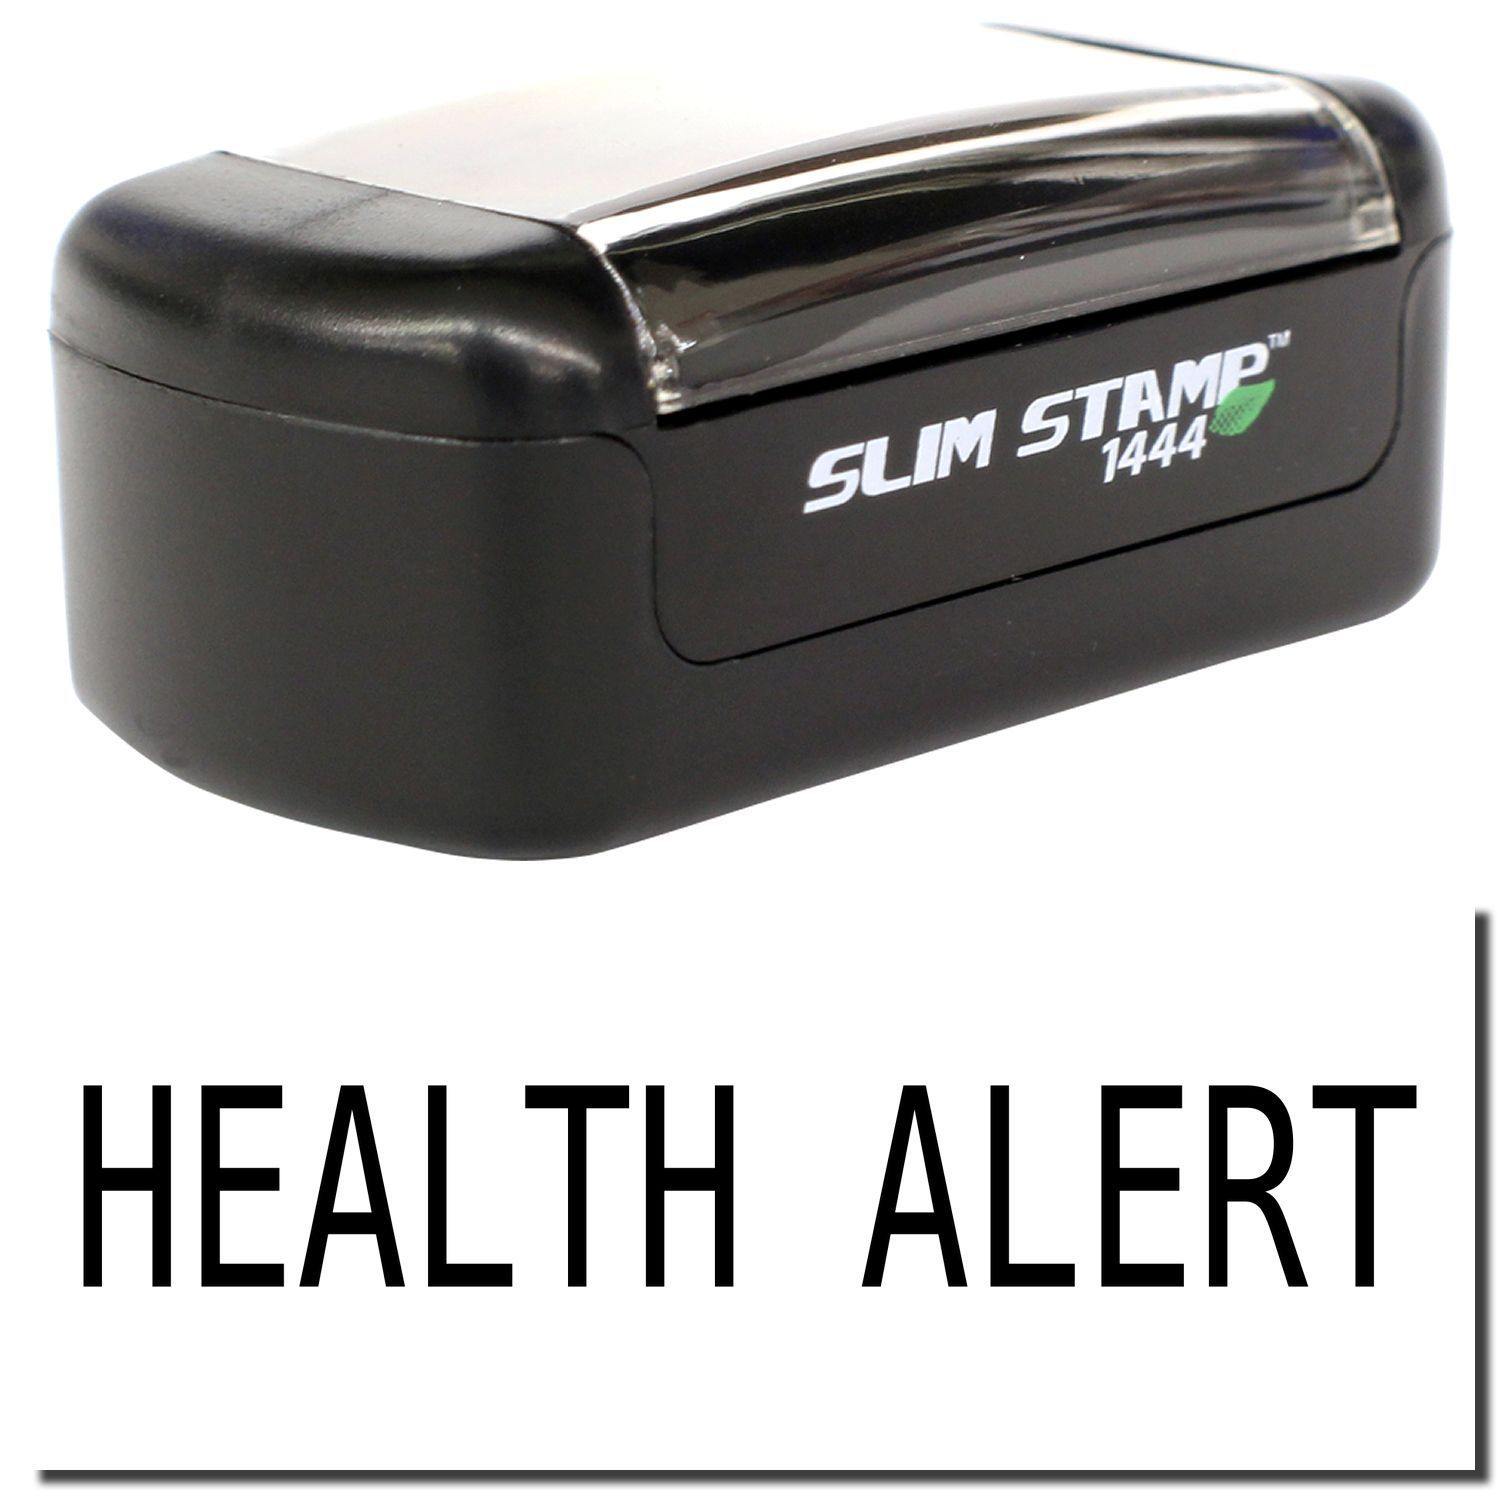 A stock office pre-inked stamp with a stamped image showing how the text "HEALTH ALERT" is displayed after stamping.